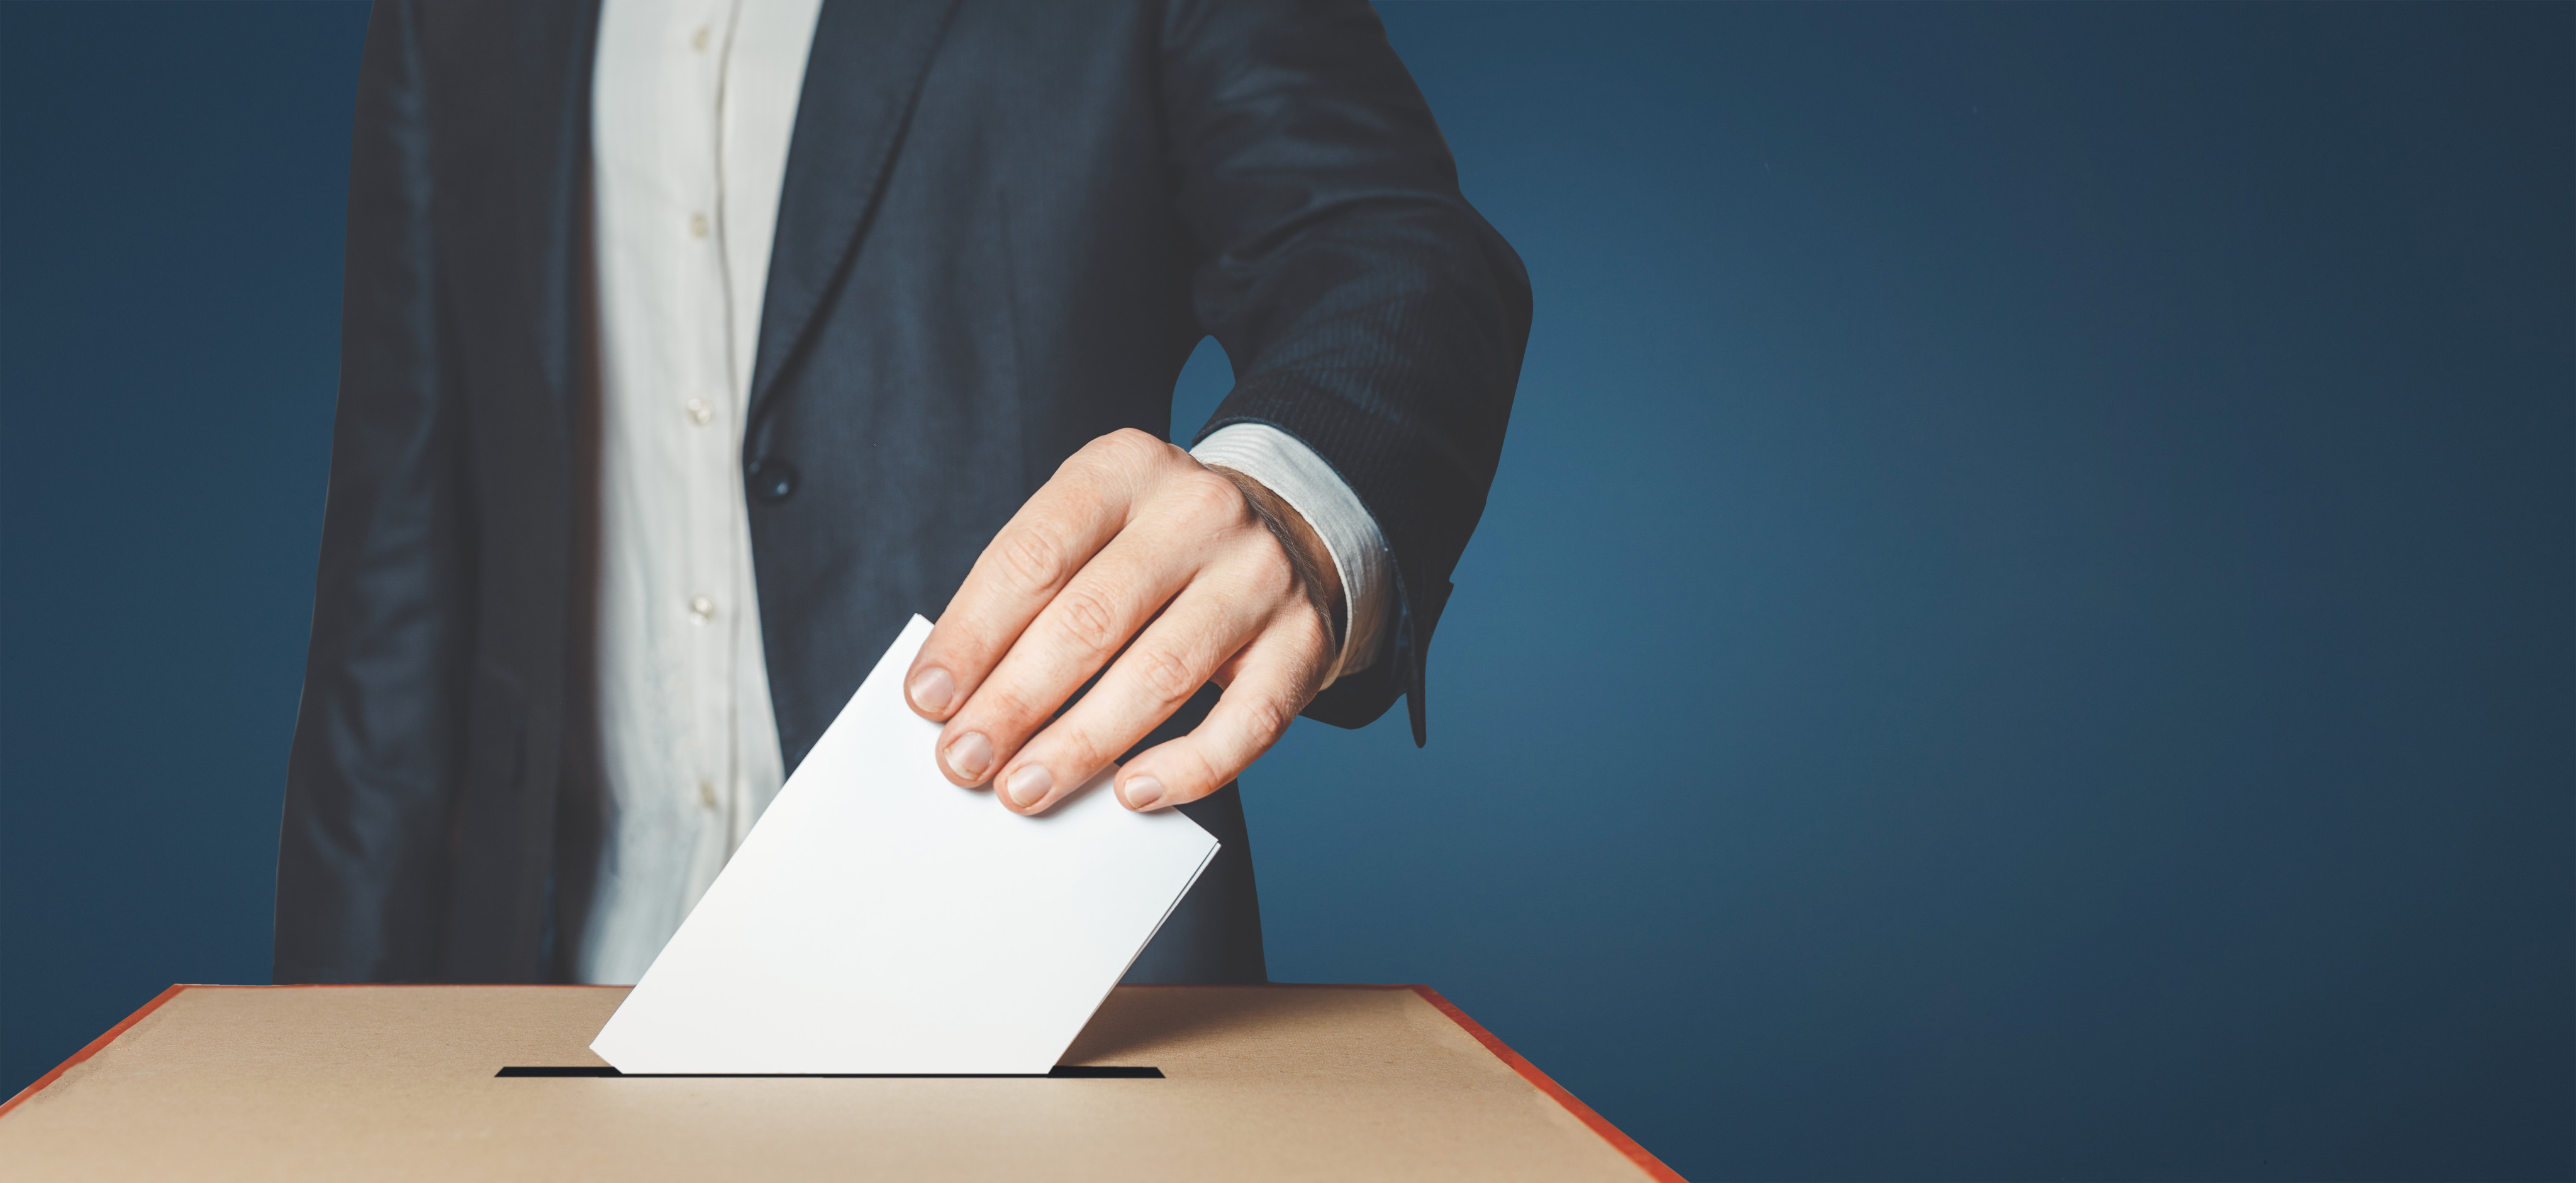 Several nations will hold presidential and legislative elections in 2024. Photo: Shutterstock 